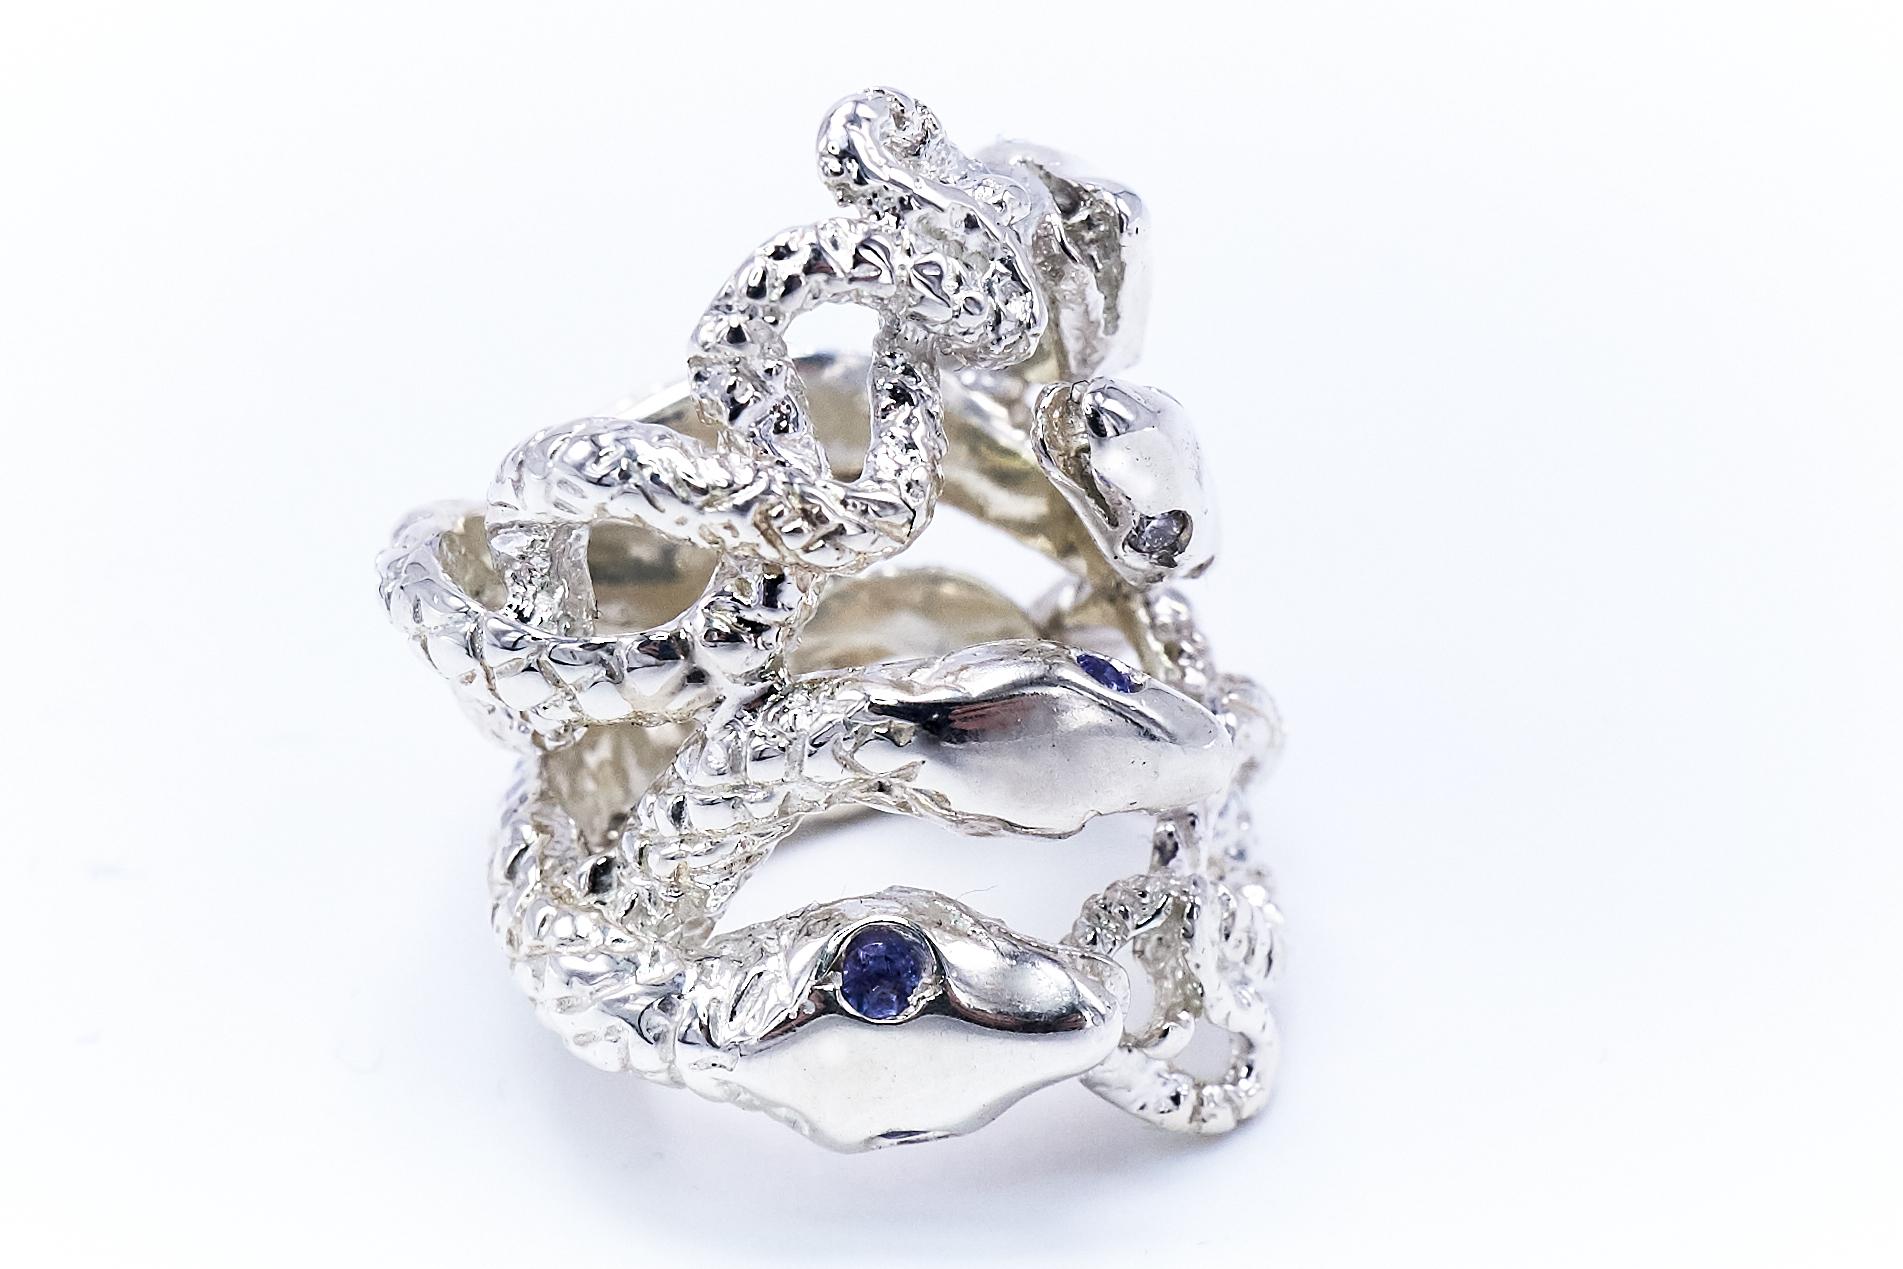 White Diamond Ruby Tanzanite Snake Silver Ring Cocktail Statement J Dauphin For Sale 1